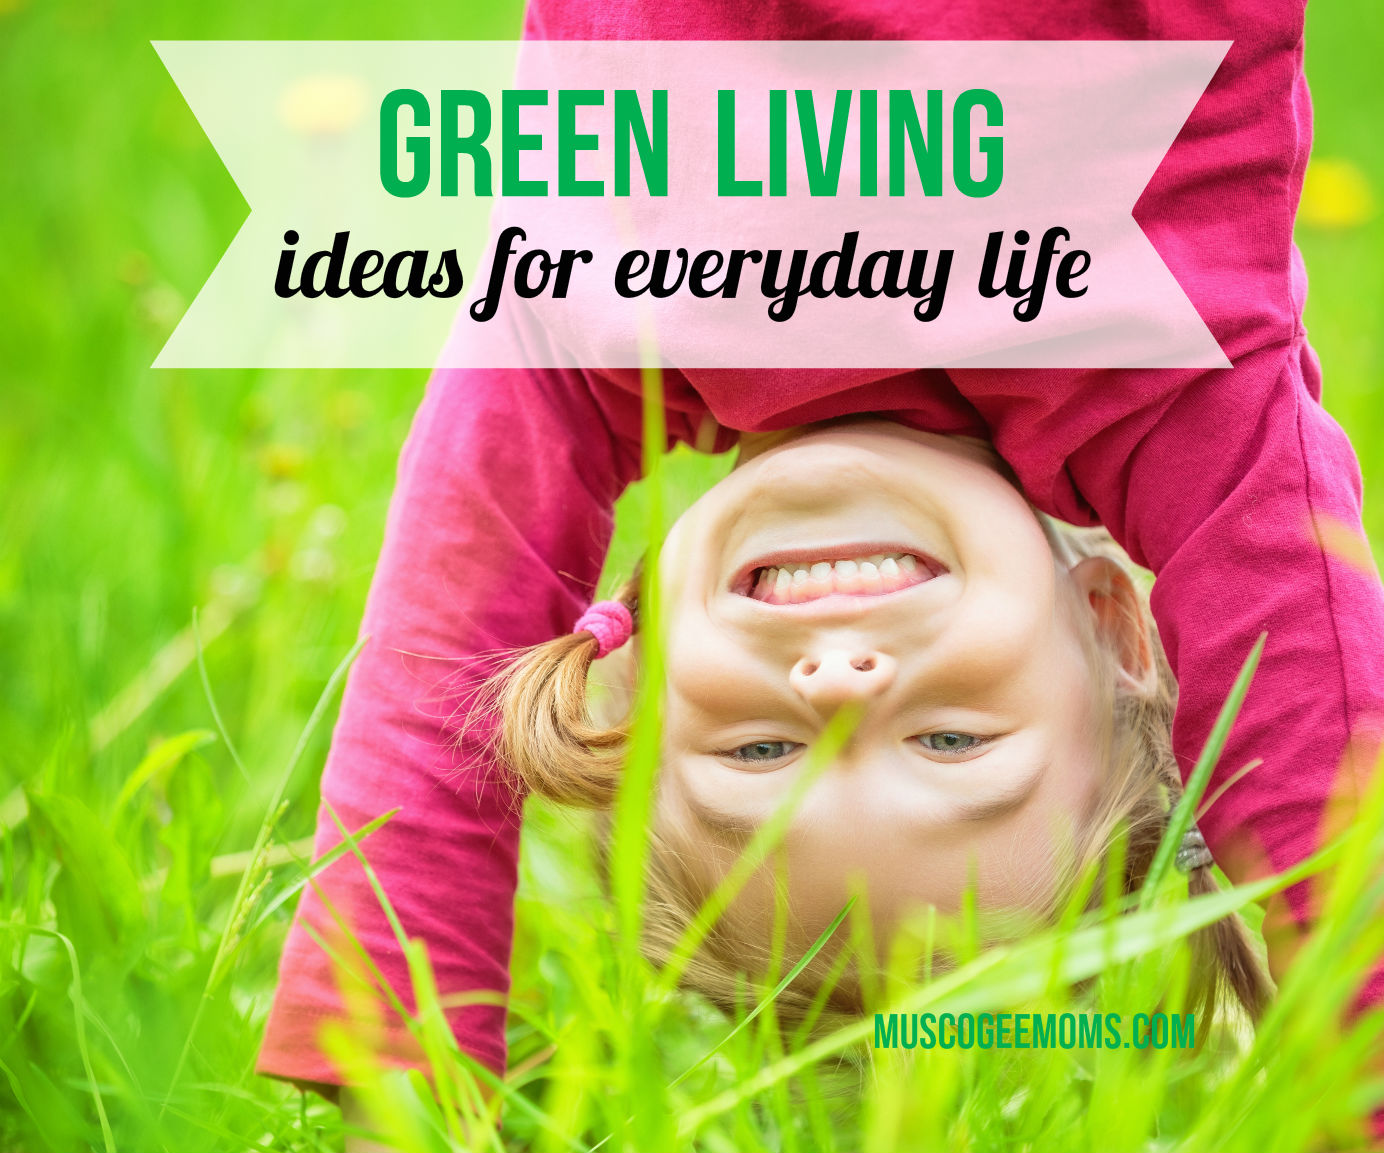 Green Living: Ideas for everyday life